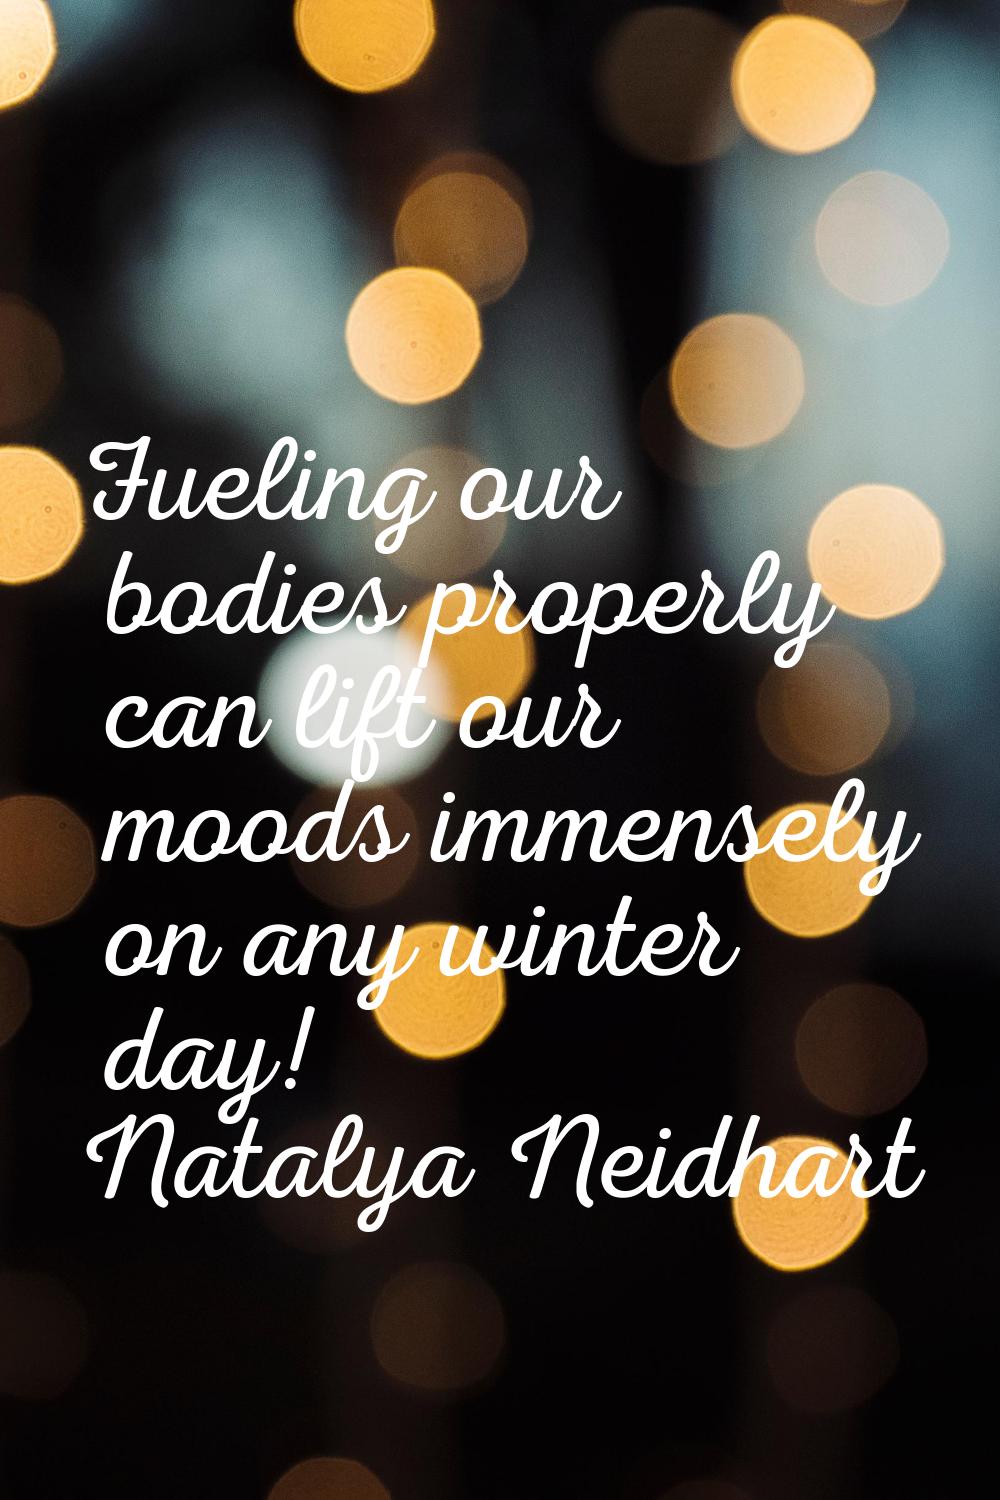 Fueling our bodies properly can lift our moods immensely on any winter day!